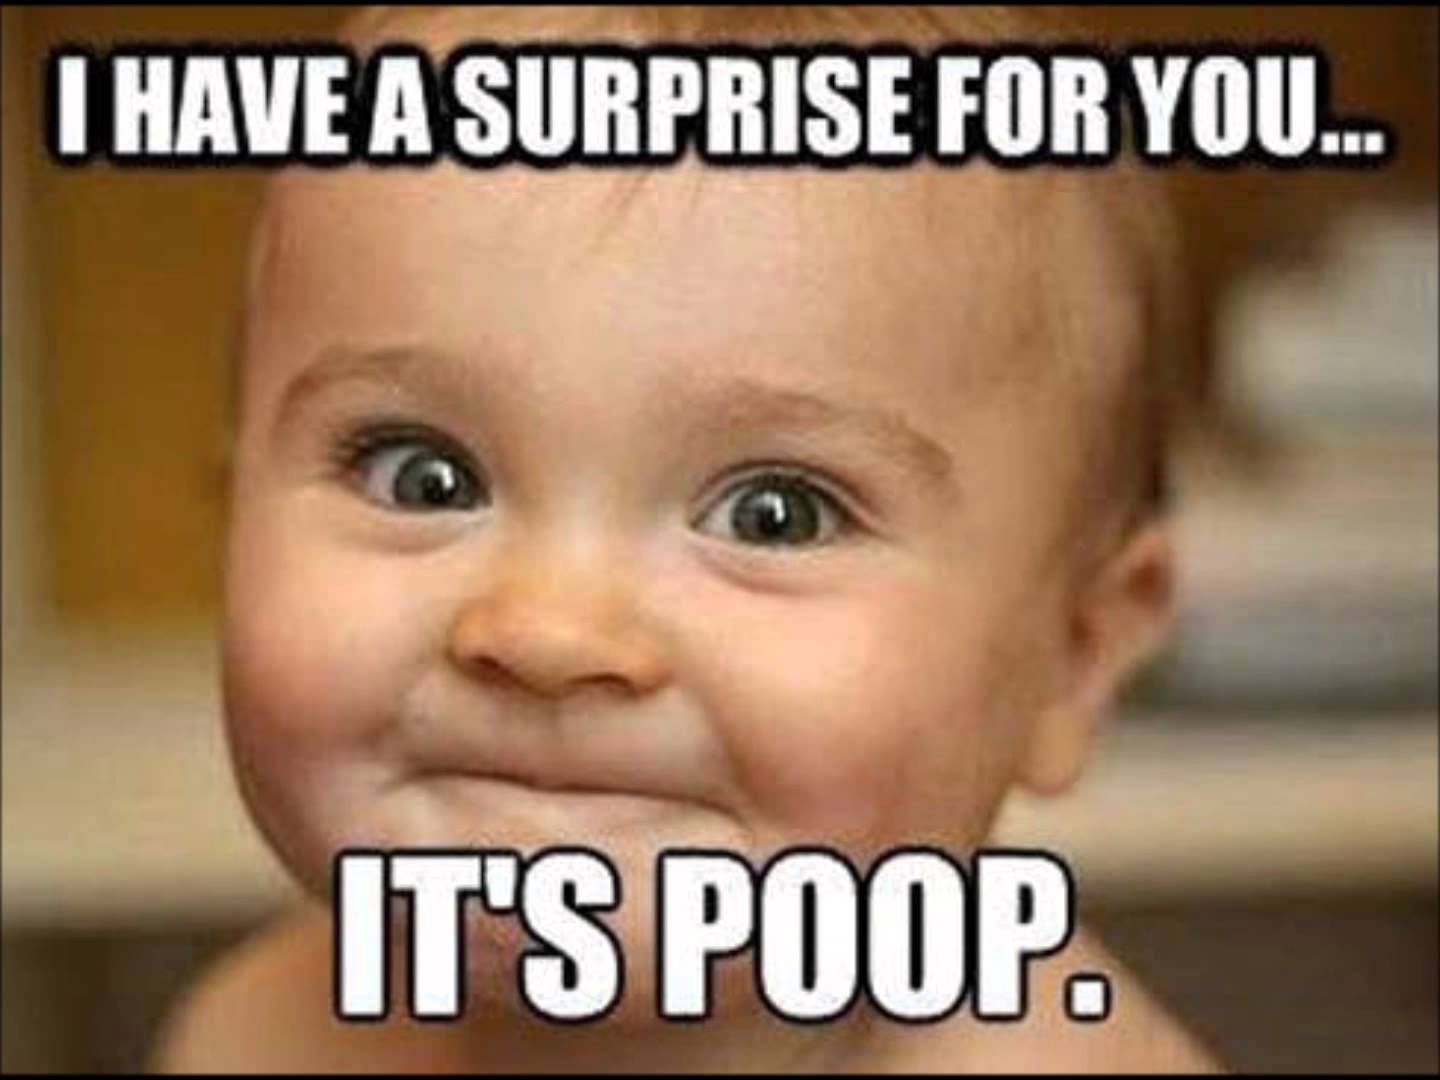 I Have A Surprise For You Funny Baby Image